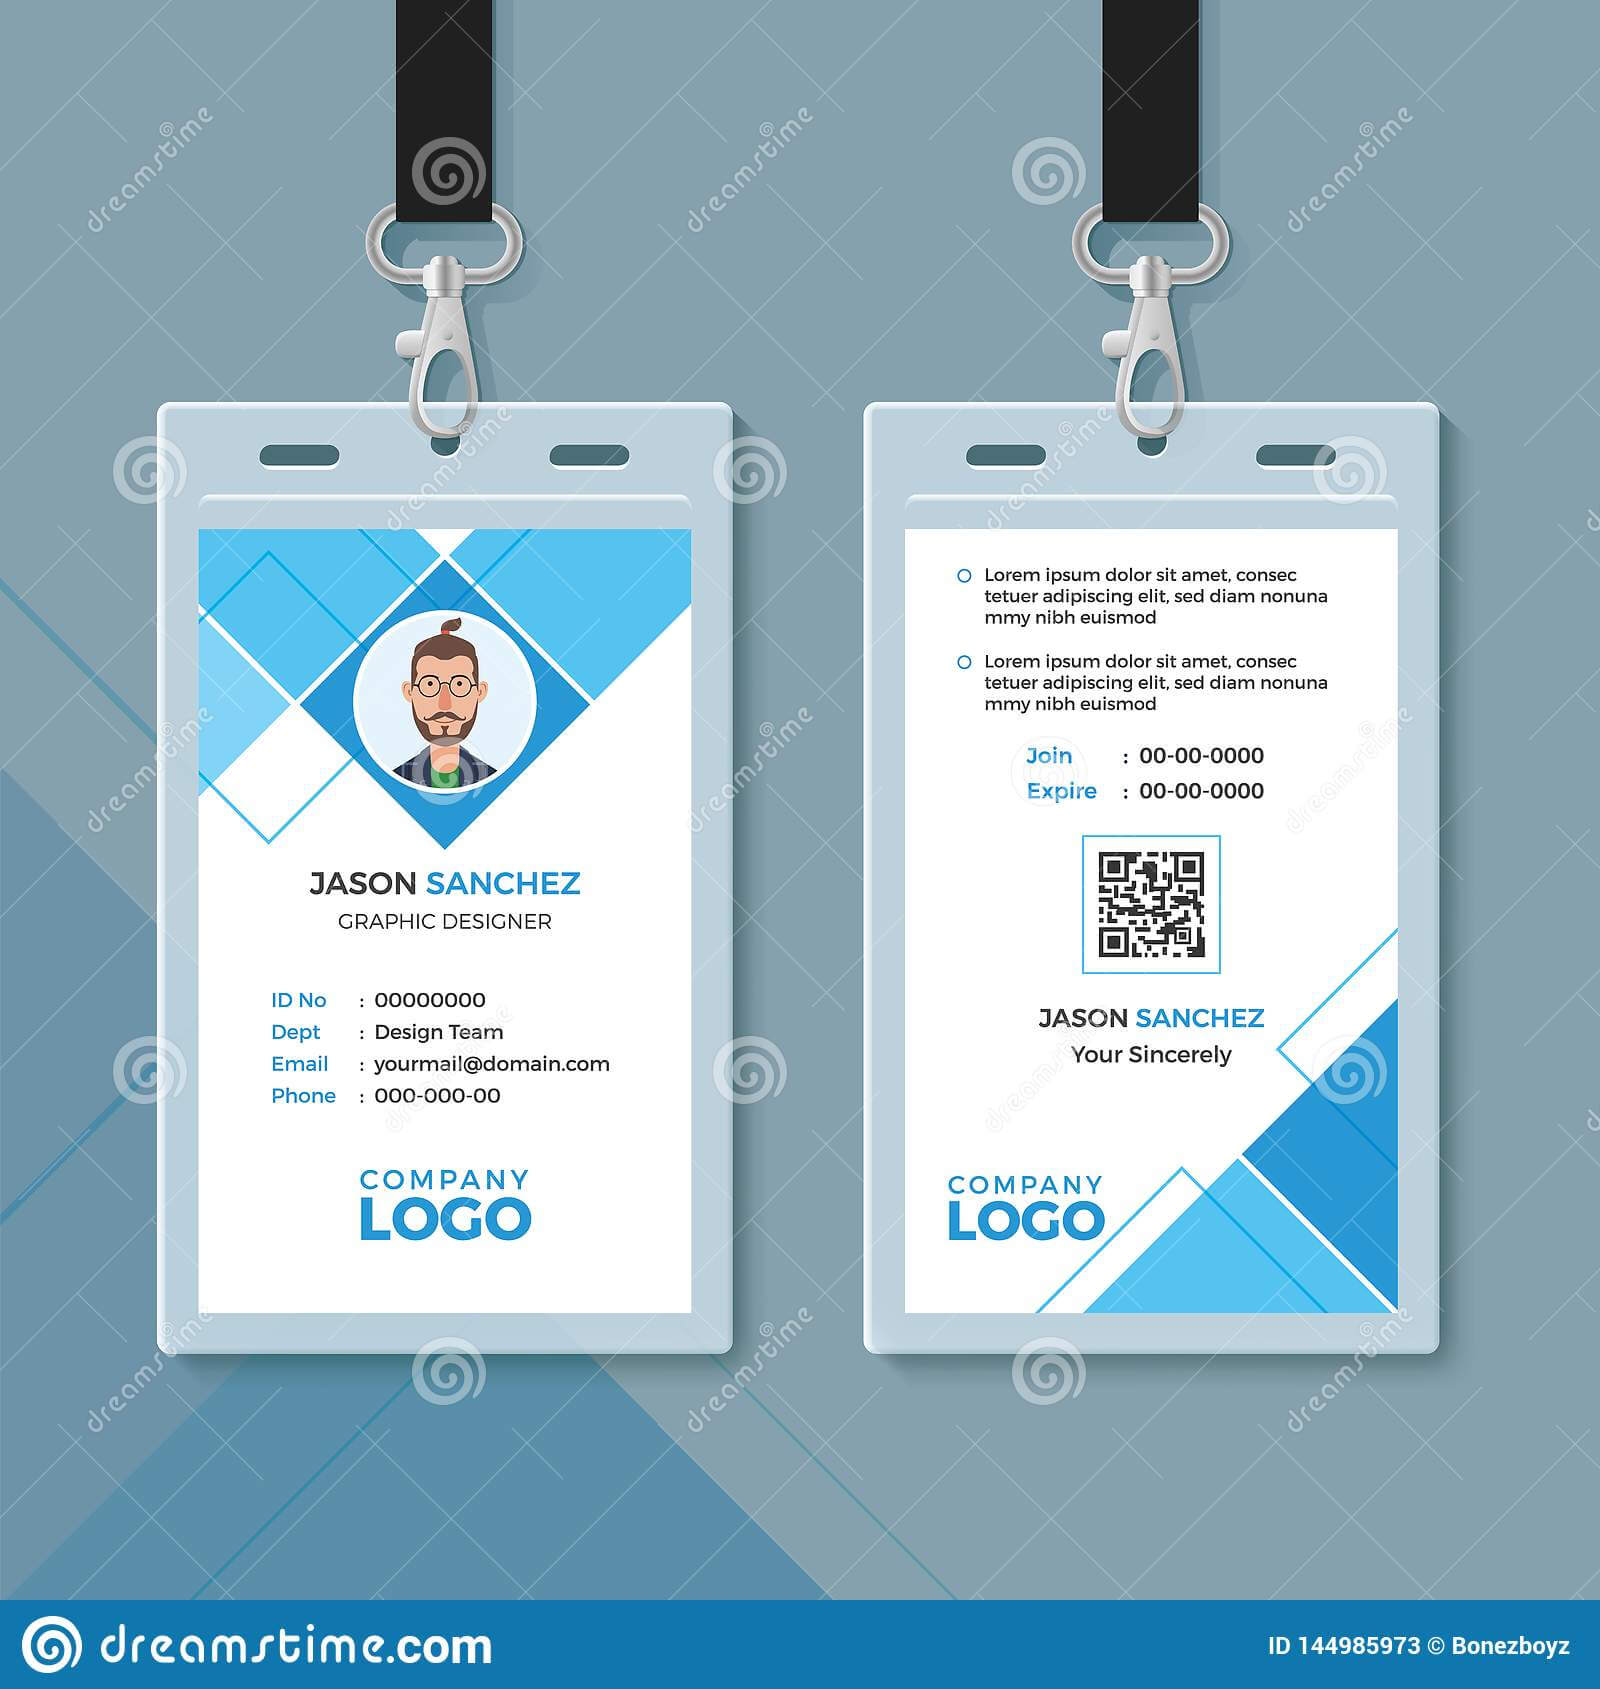 Simple Blue Geometric Id Card Design Template Stock Vector Intended For Company Id Card Design Template